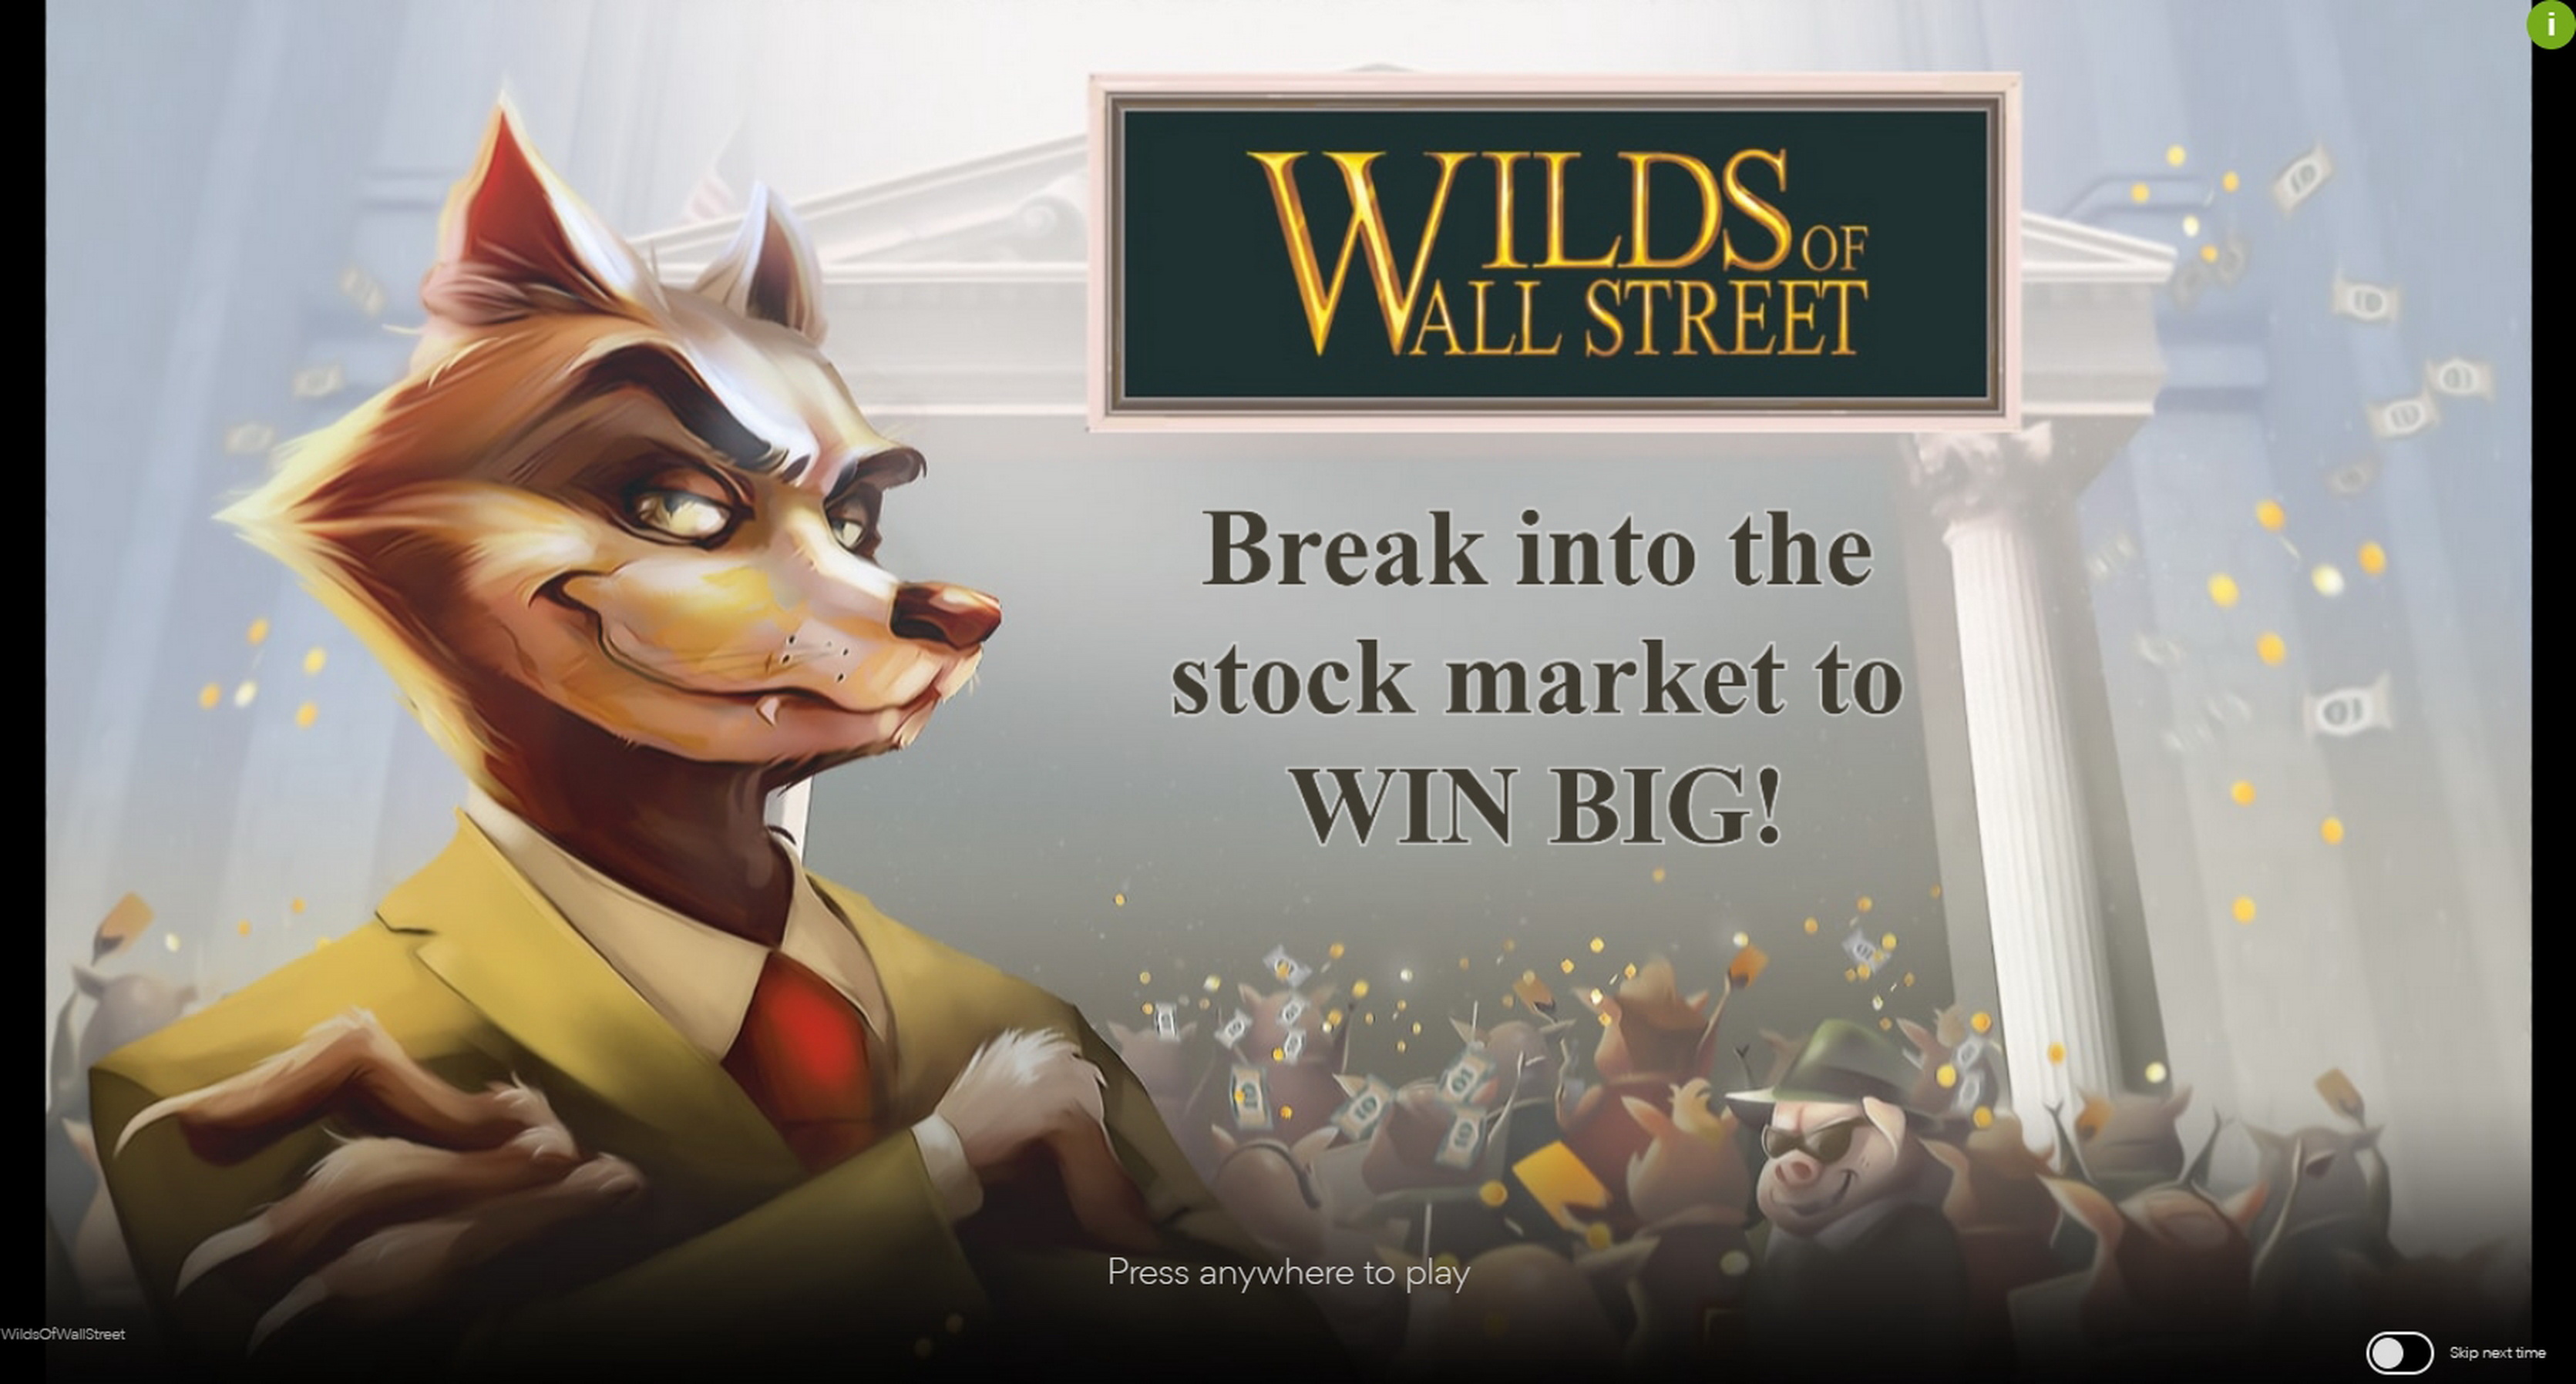 Play Wilds of Wall Street Free Casino Slot Game by Spearhead Studios